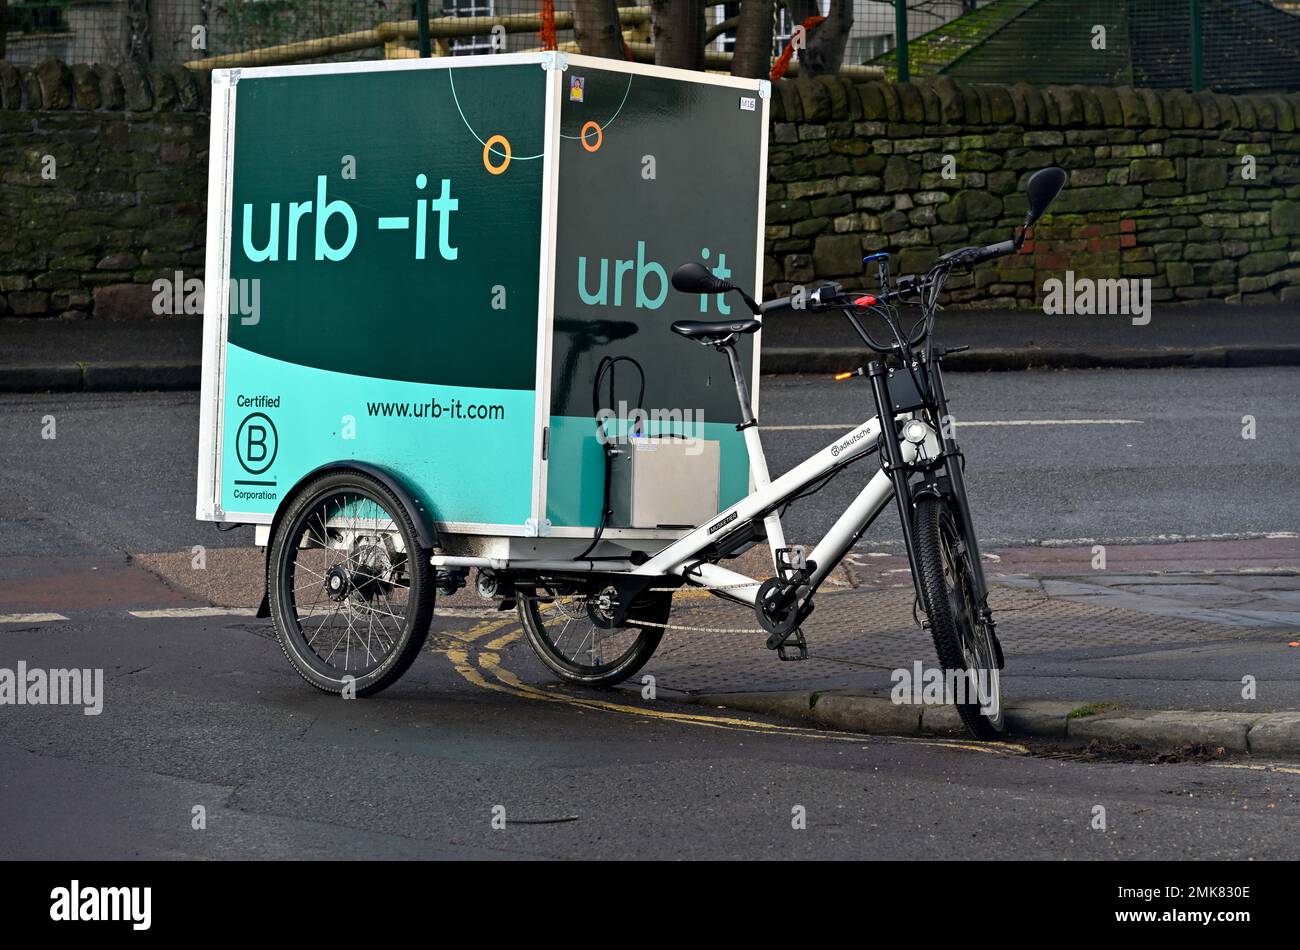 Cargo bike used for delivering parcels by cycle courier urb-it illegally parked on double yellow lines directly on corner and blocking pedestrians Stock Photo